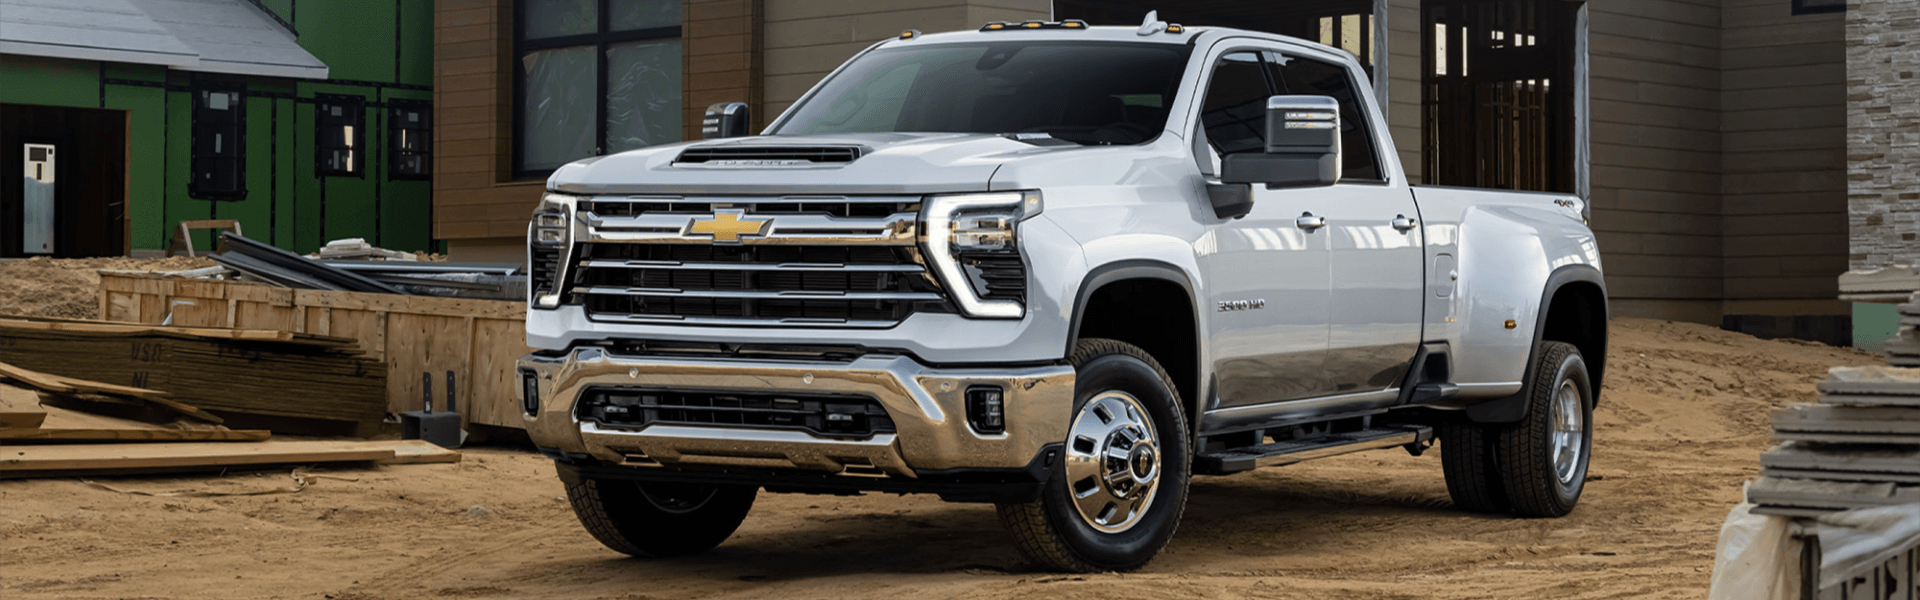 2024 Chevy Silverado HD Parked On Dirt Road